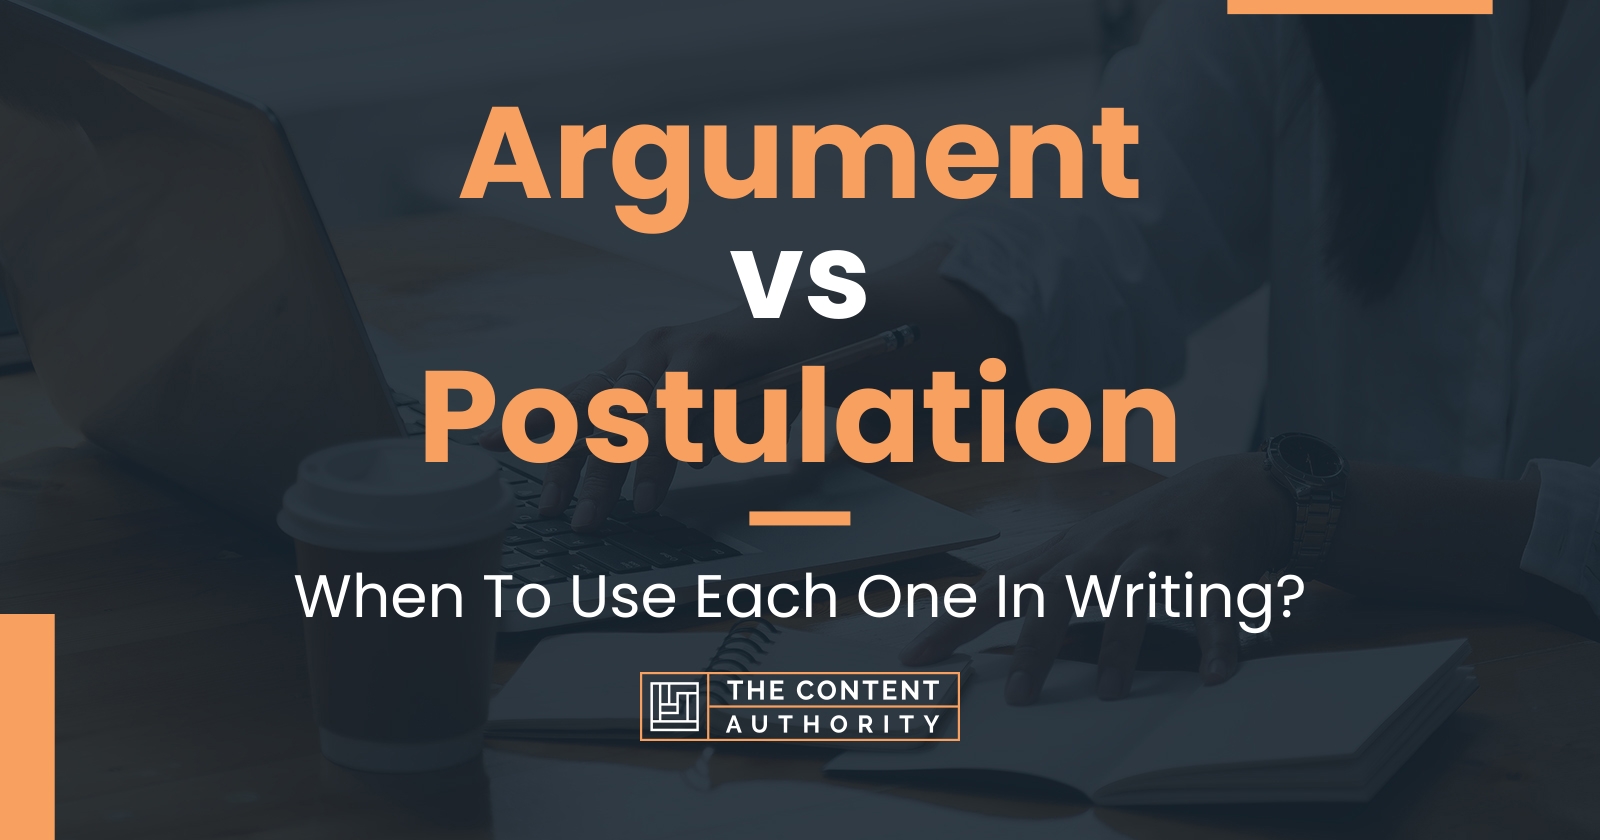 Argument vs Postulation: When To Use Each One In Writing?